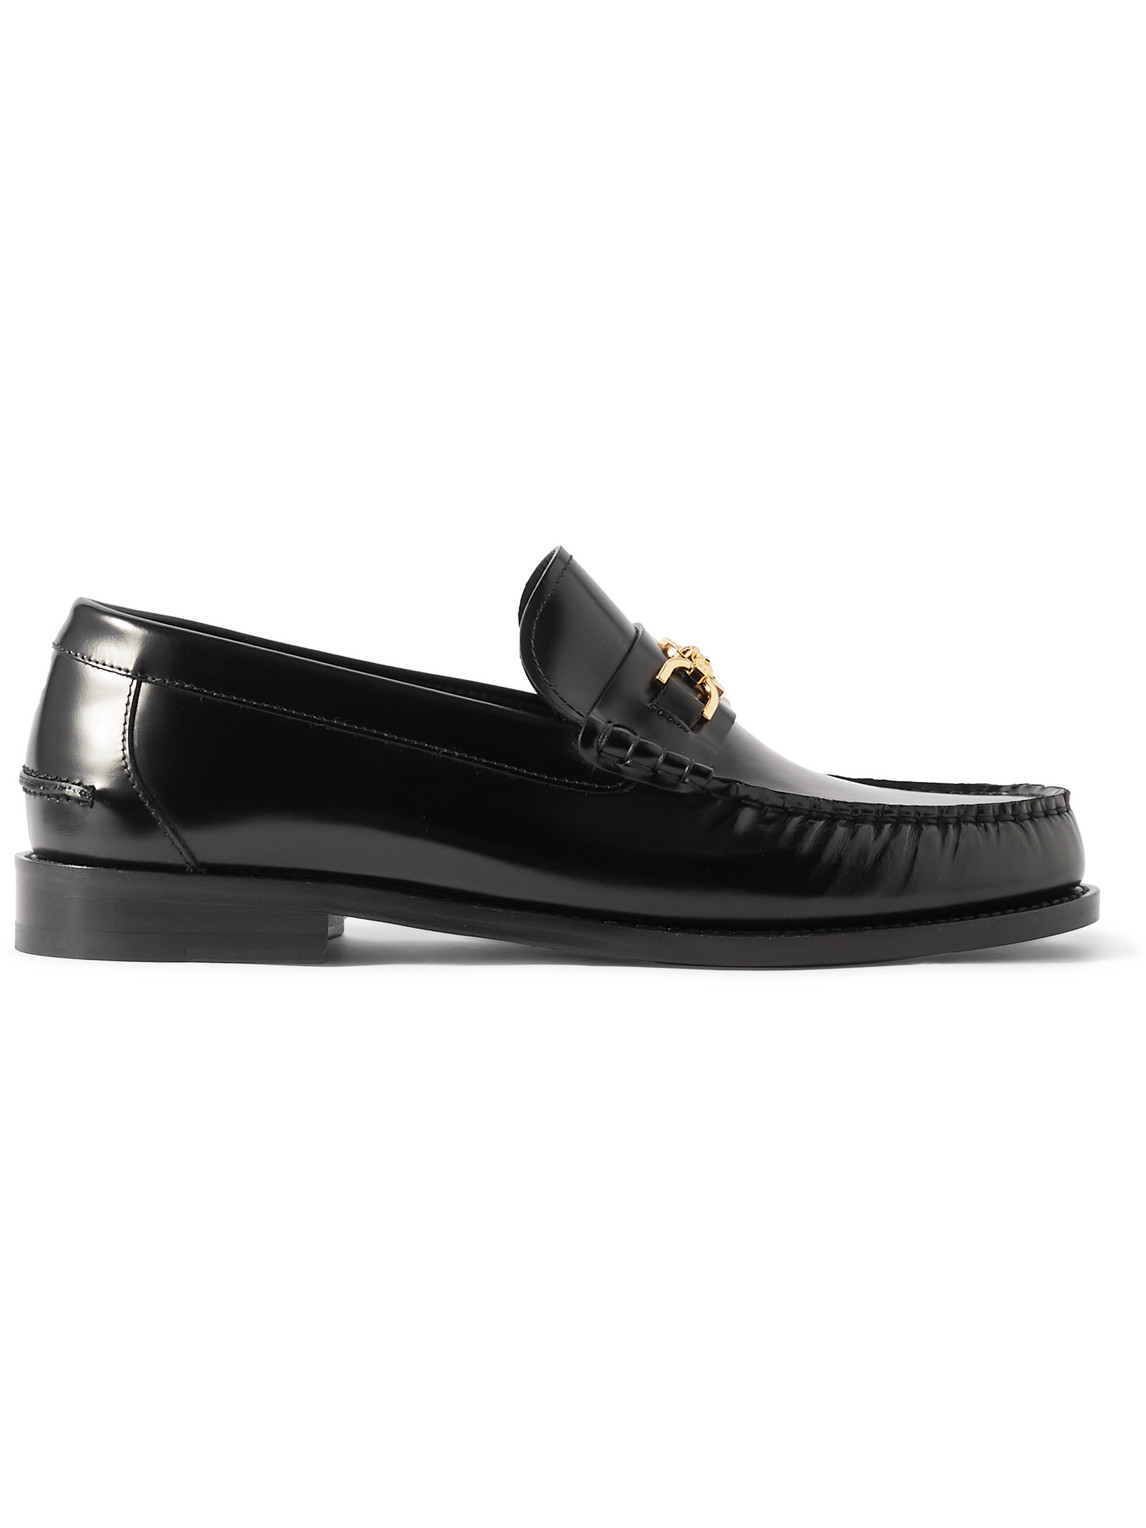 Horsebit-Embellished Patent-Leather Loafers